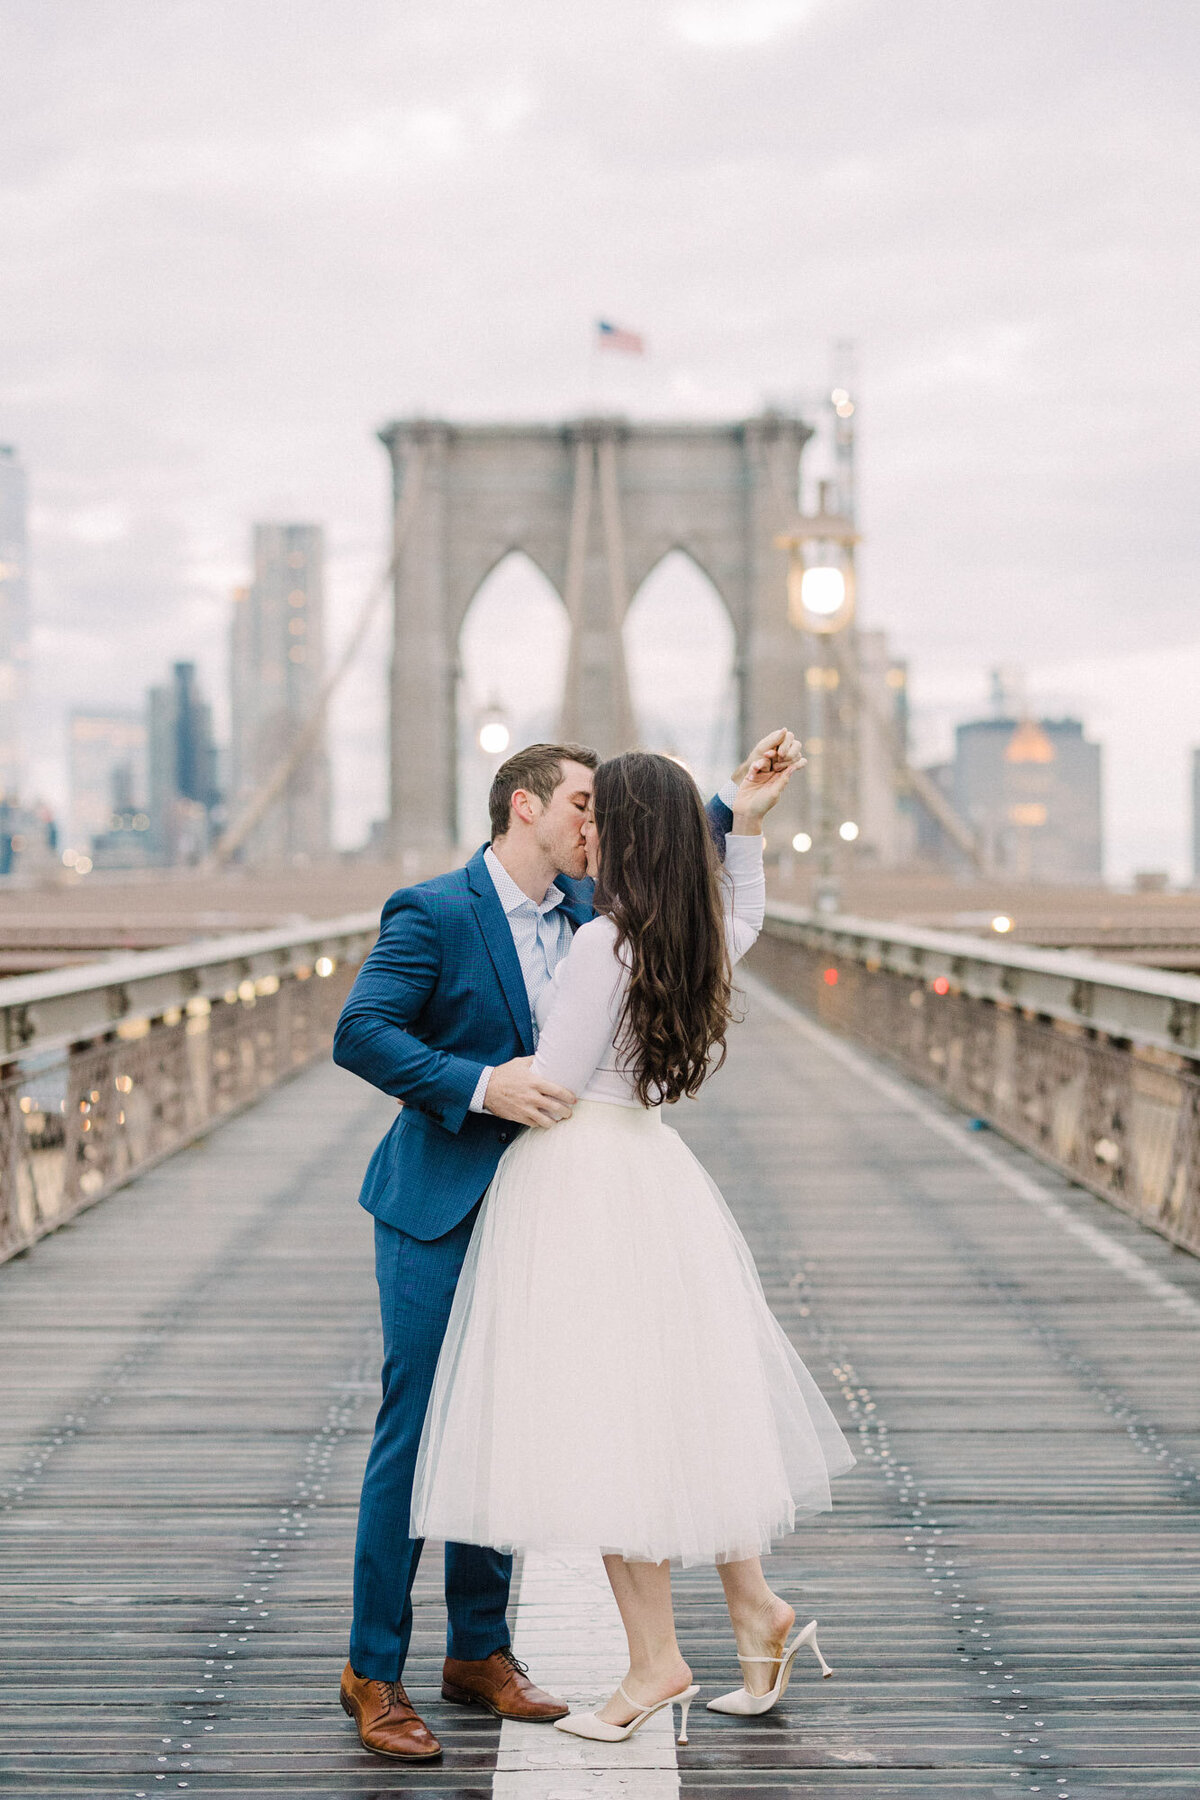 An engagement photo taken at sunrise on the Brooklyn Bridge in New York City